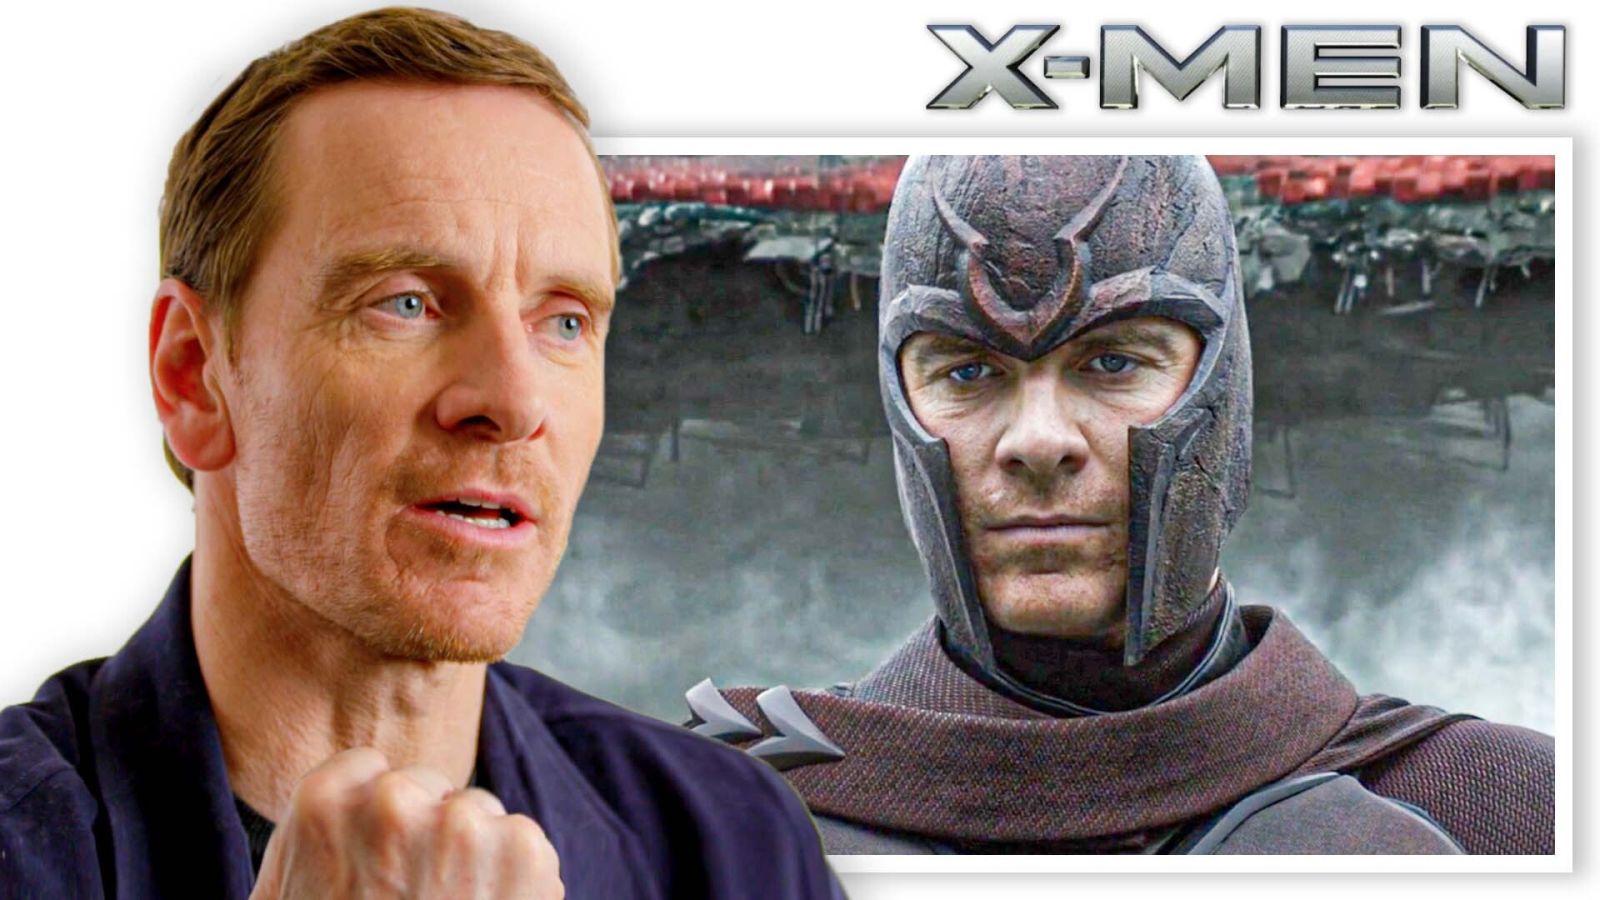 Michael Fassbender Breaks Down His Career, from 'Inglourious Basterds' to 'X-Men'